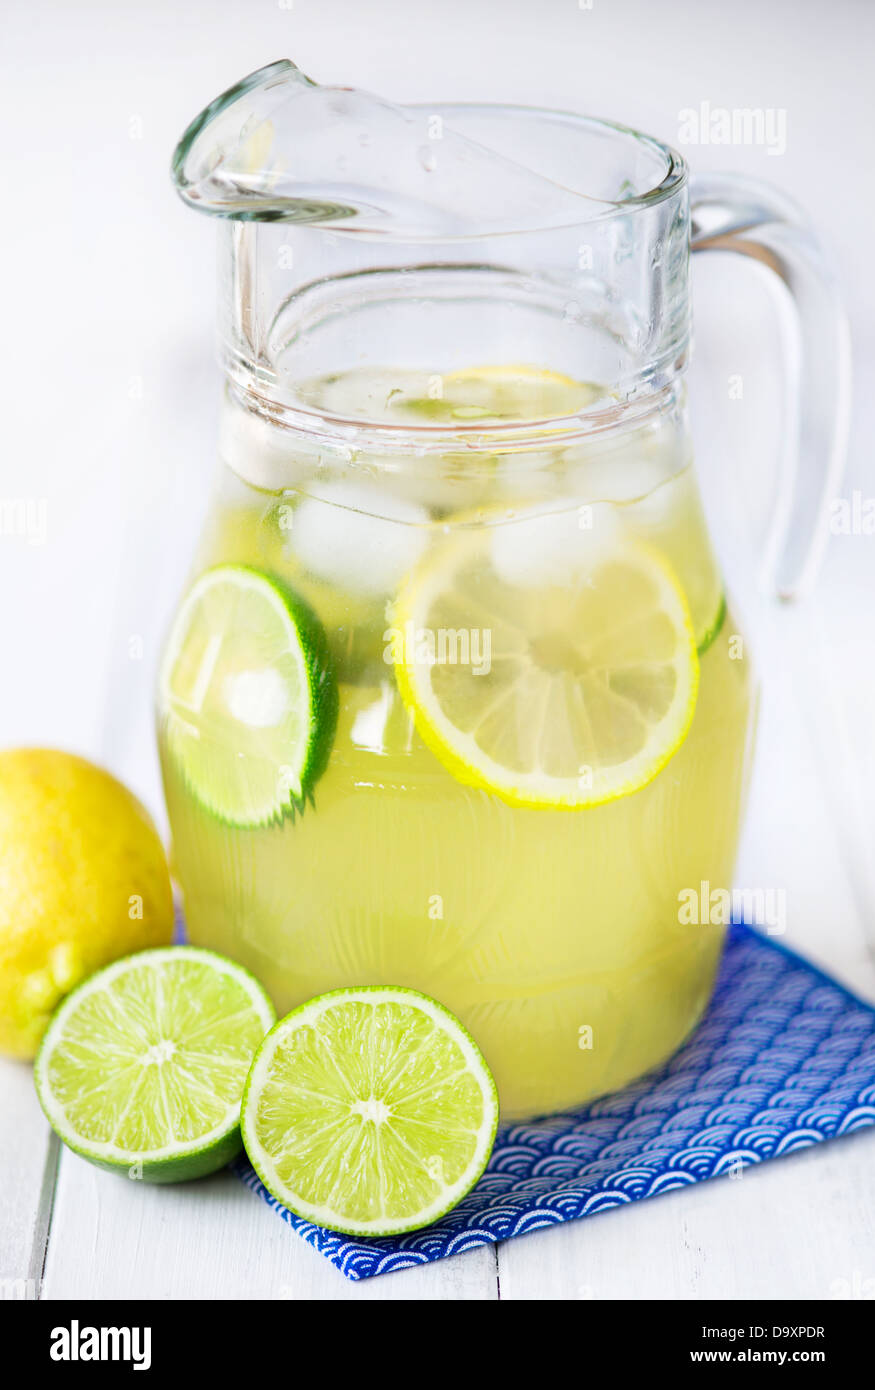 Lemonade Pitcher Images – Browse 20,741 Stock Photos, Vectors, and